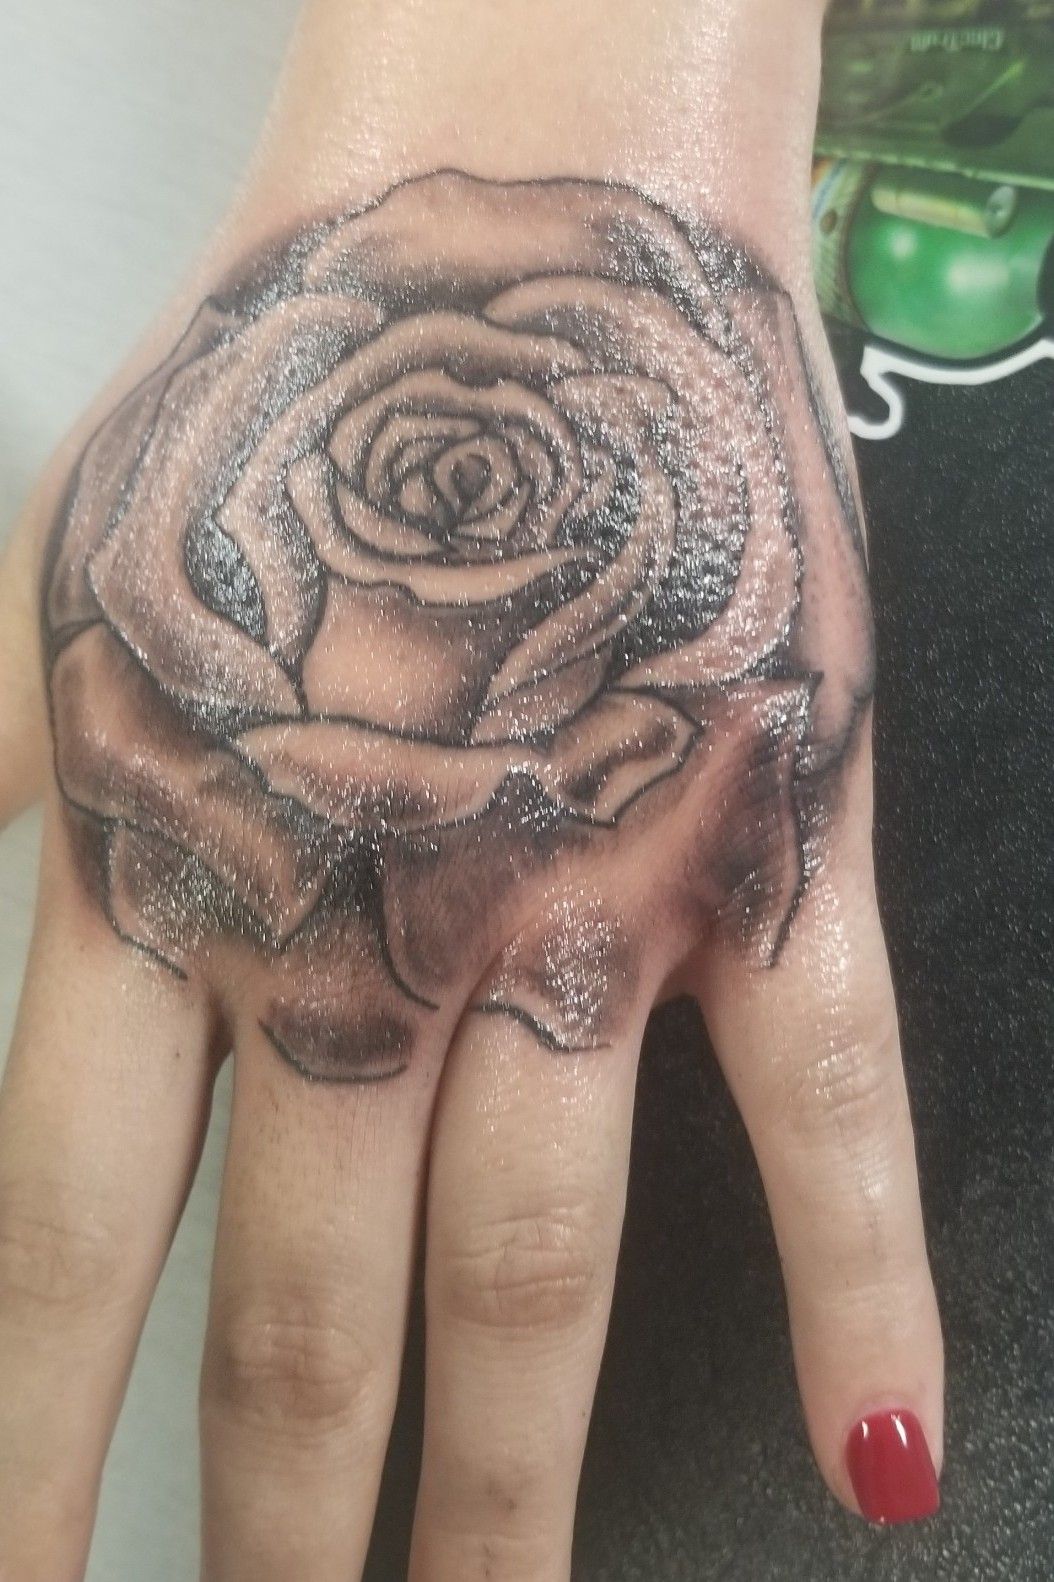 Tattoo uploaded by Jamel AkaMayweather  For booking please stop by Tx  Legends in baytown tx  Tattoodo